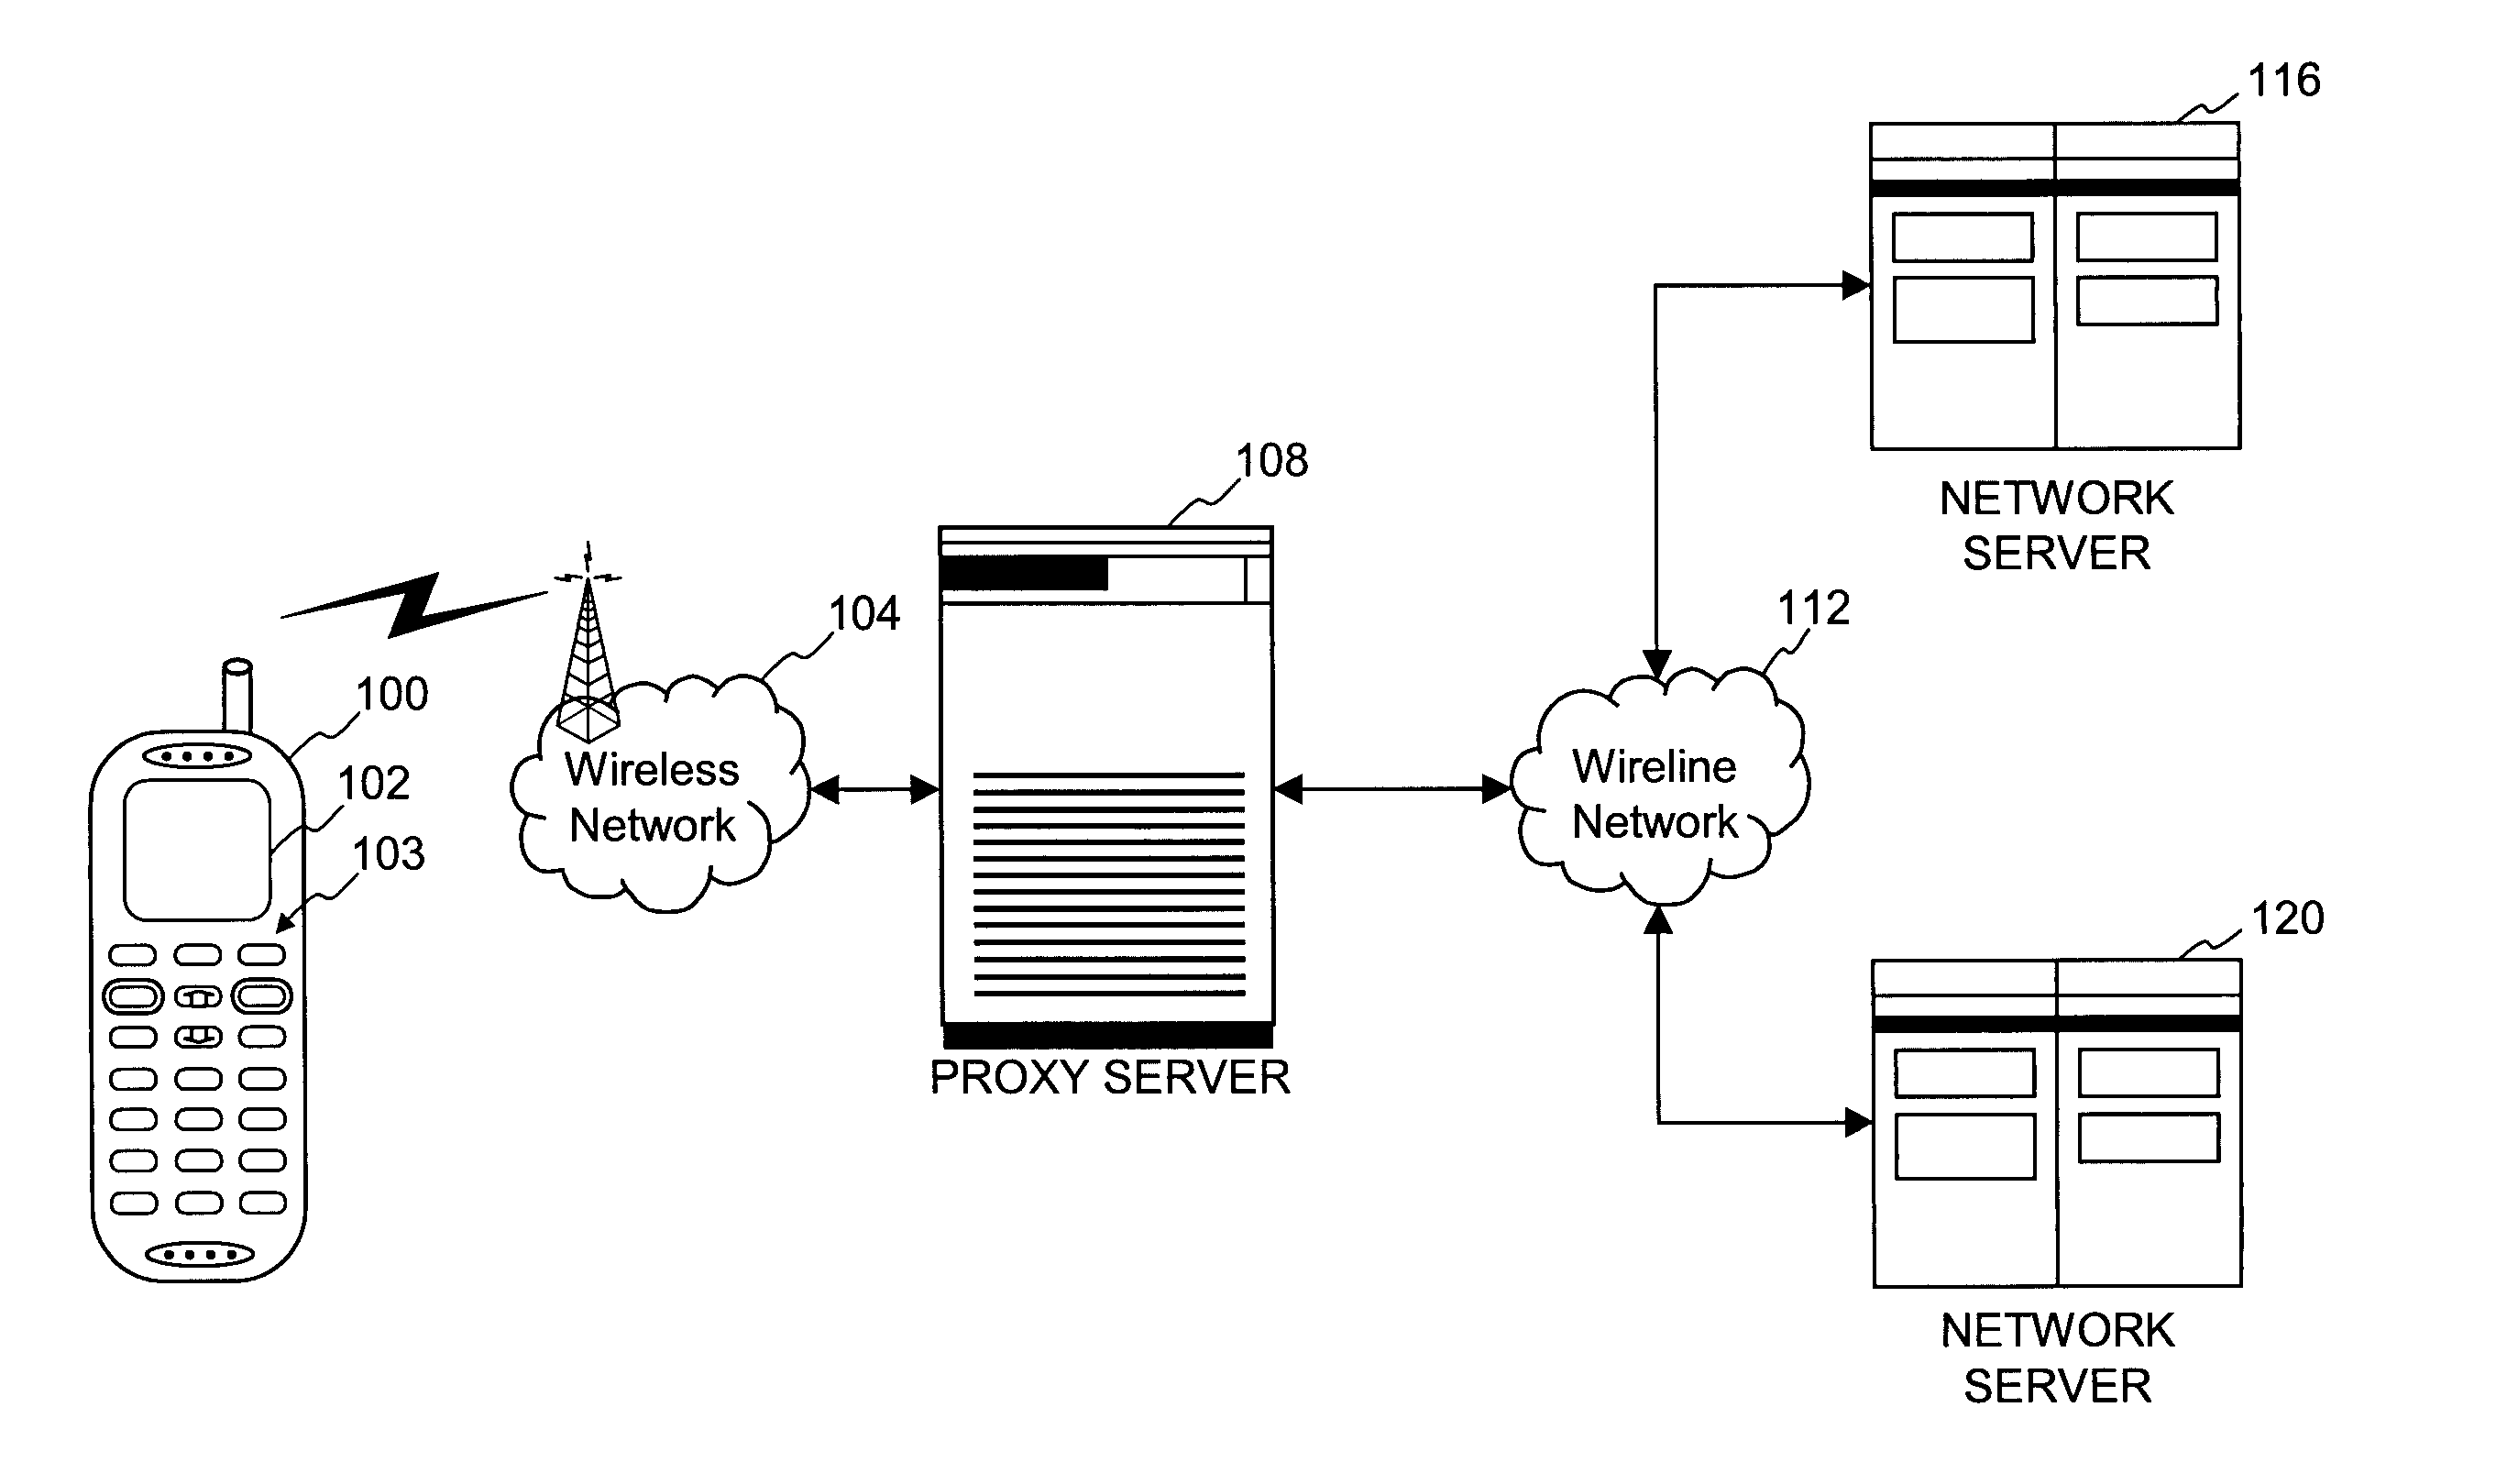 Graphical user interface features of a browser in a hand-held wireless communication device